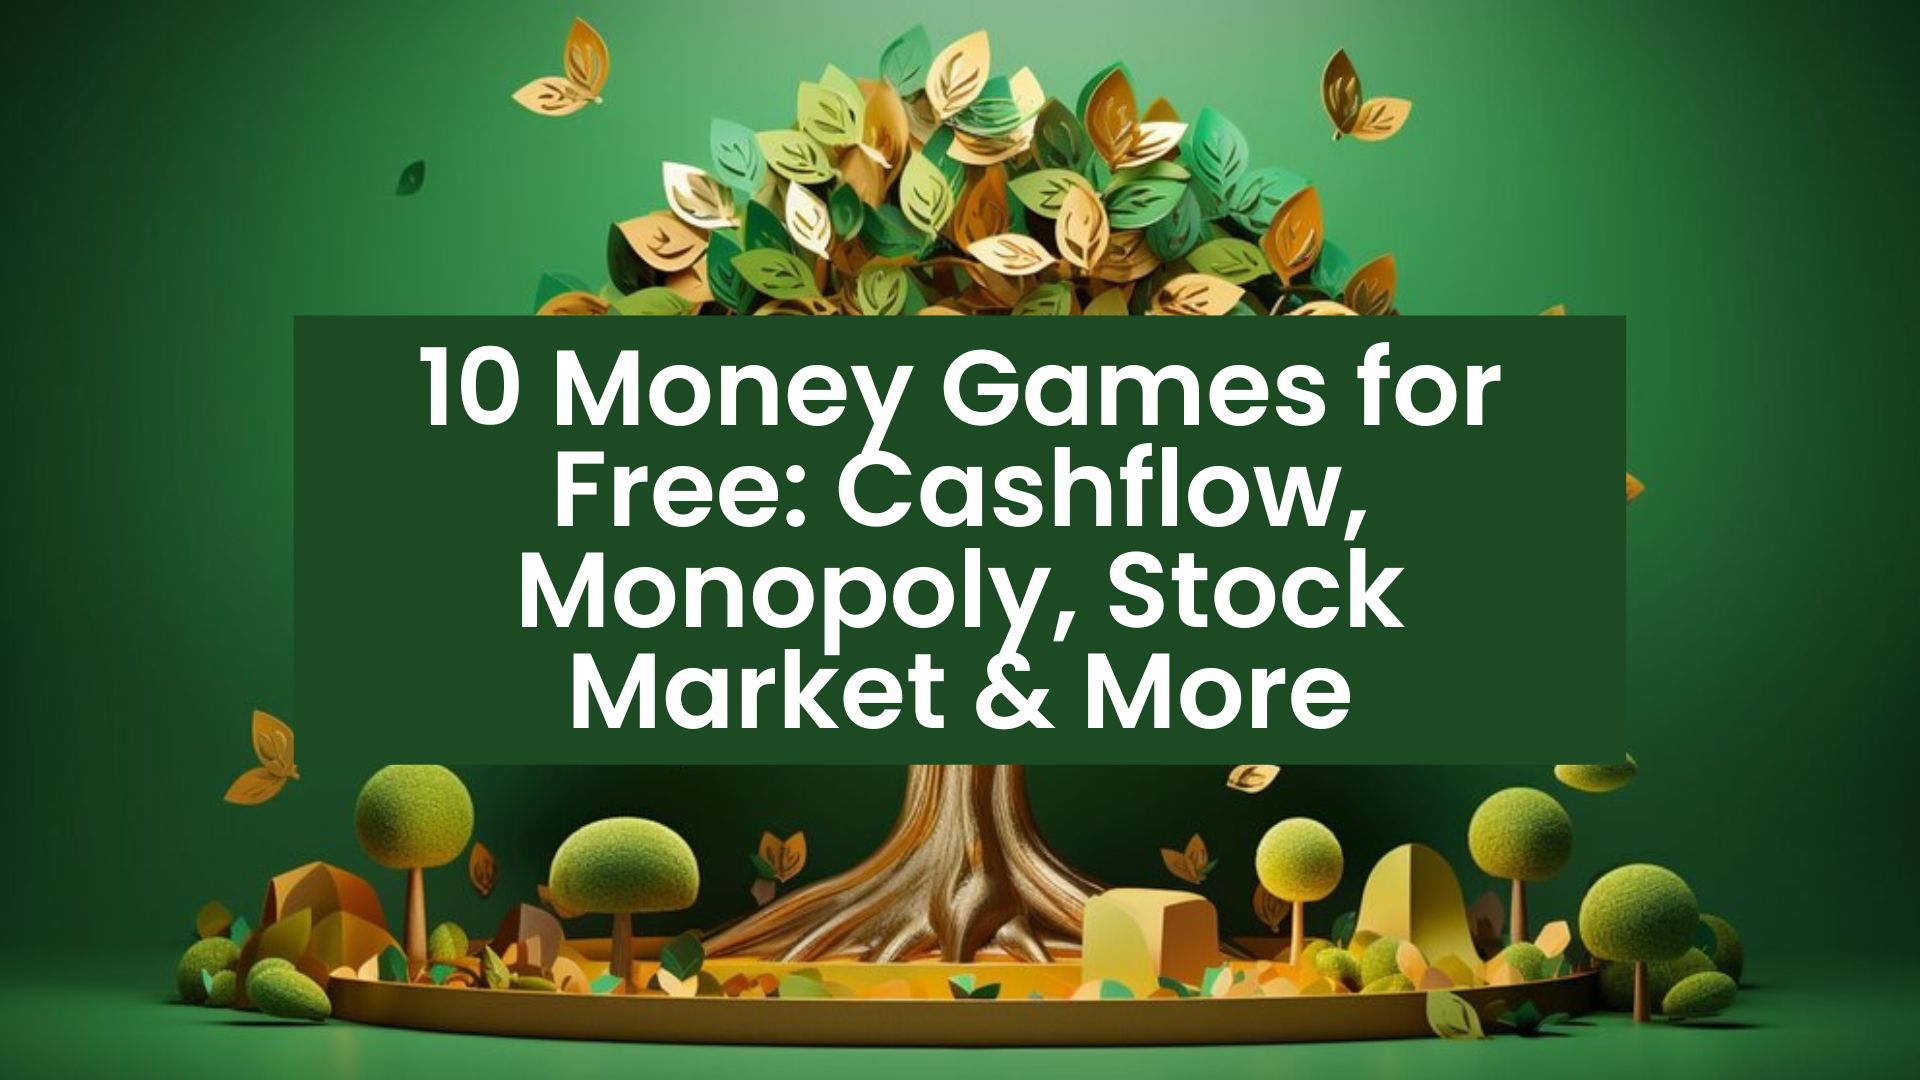 10 Money Games for Free Cashflow, Monopoly, Stock Market & More